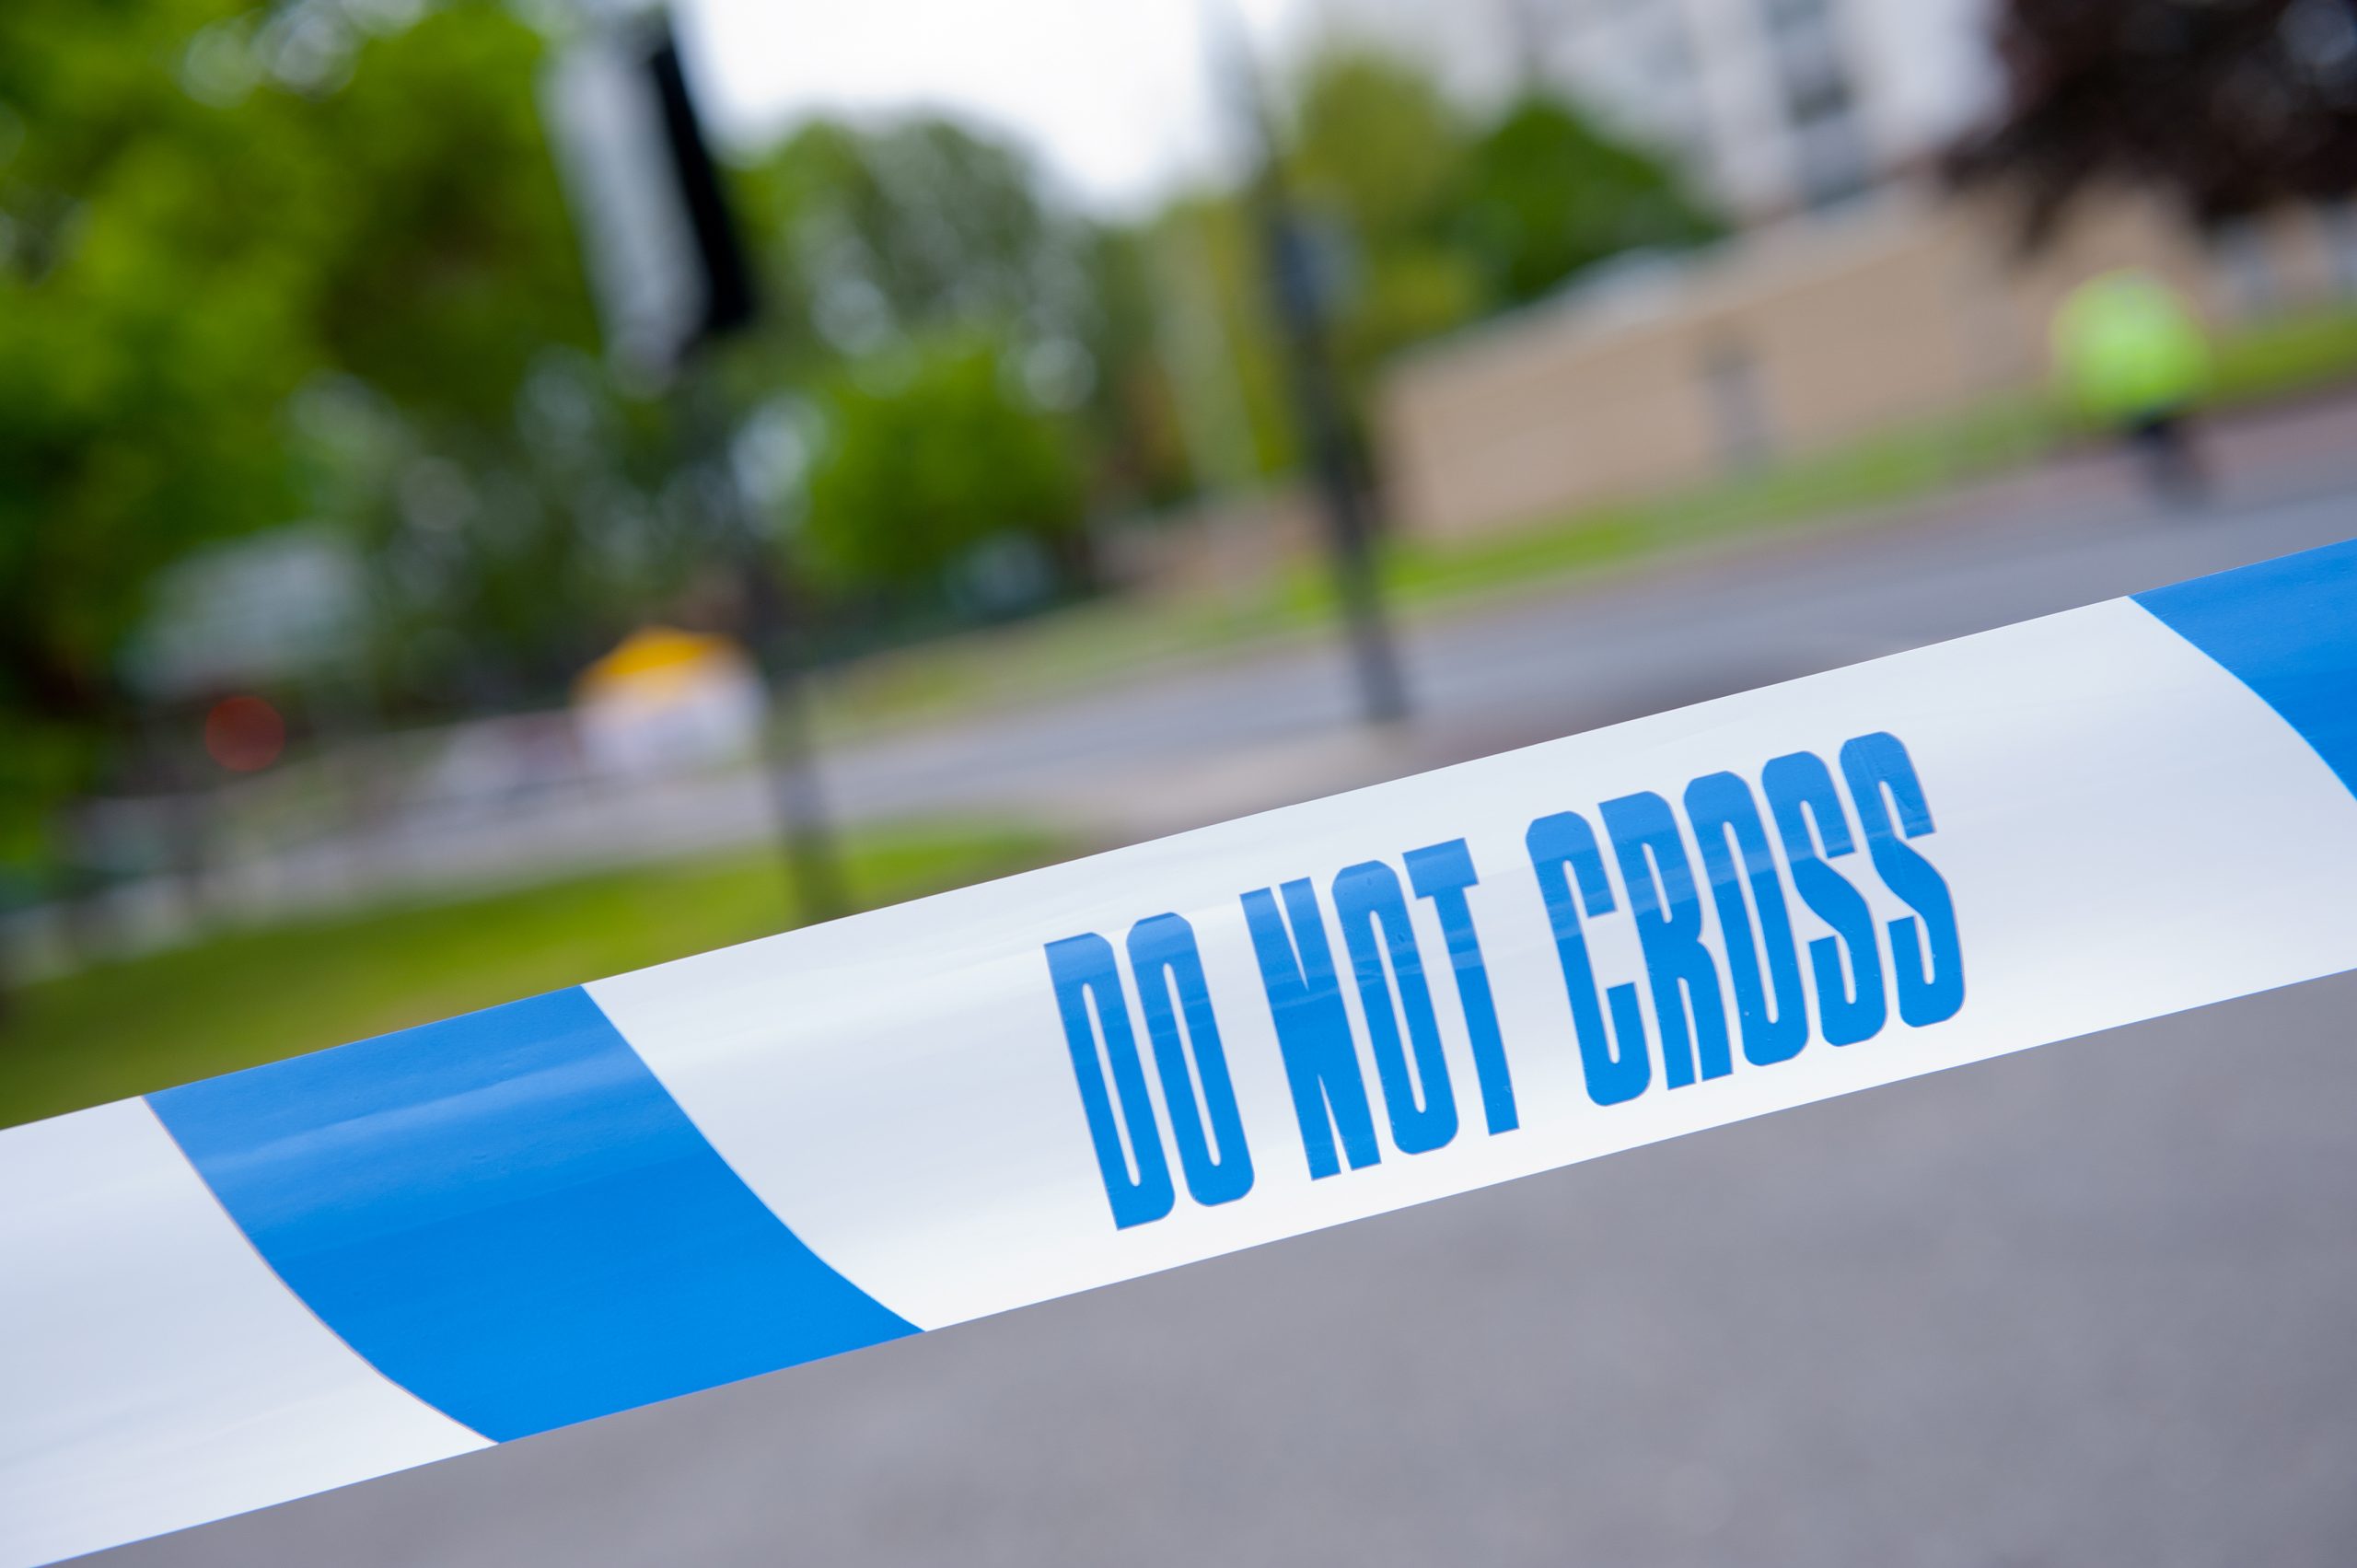 Man assaulted in town centre